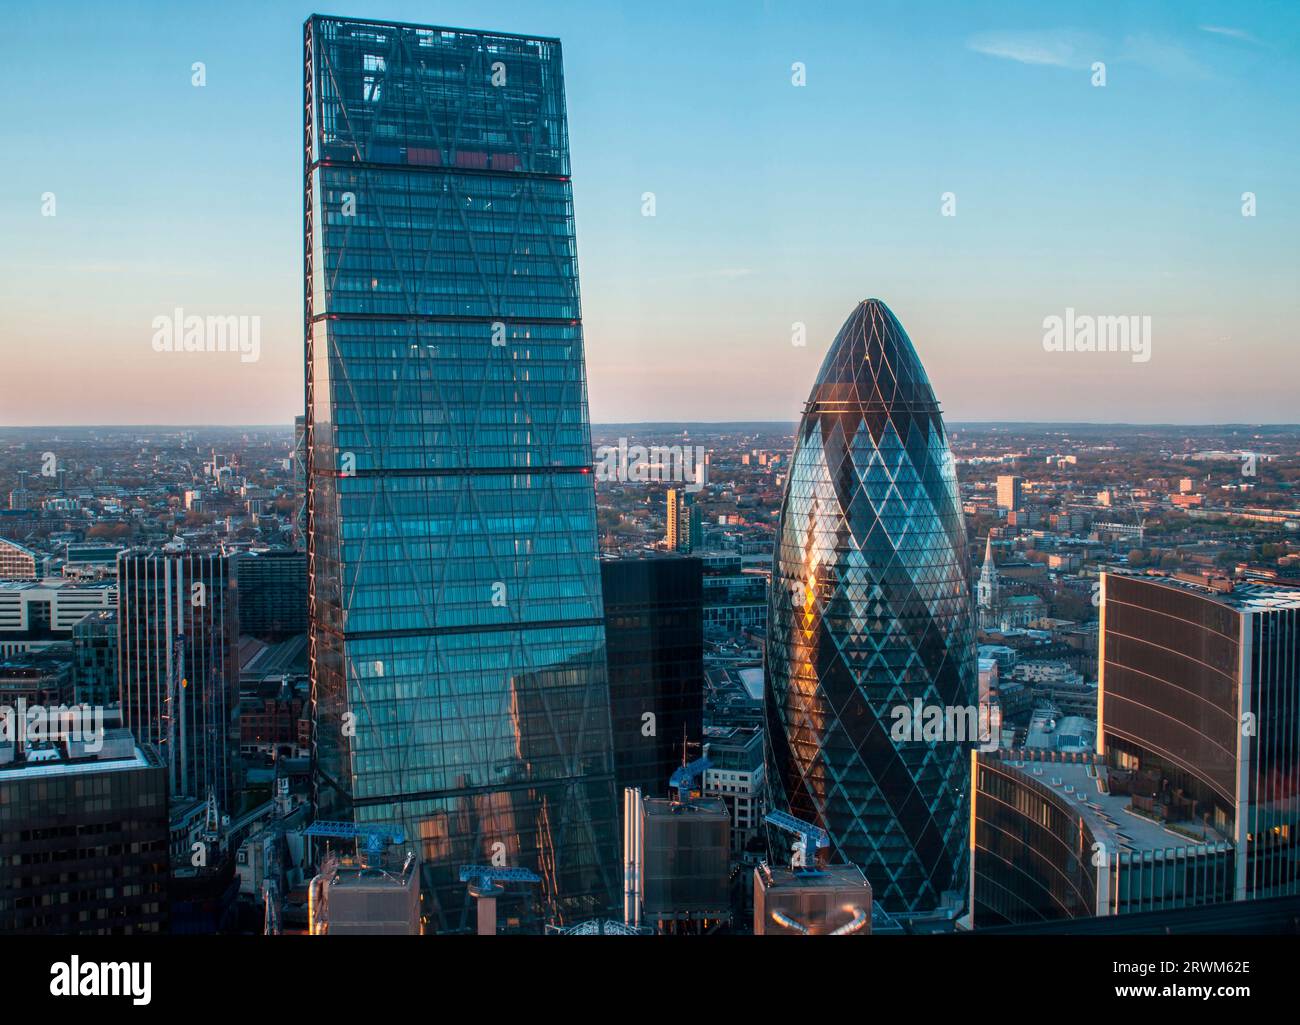 City of London skyline with the gherkin and cheesegrater skyscrapers Stock Photo